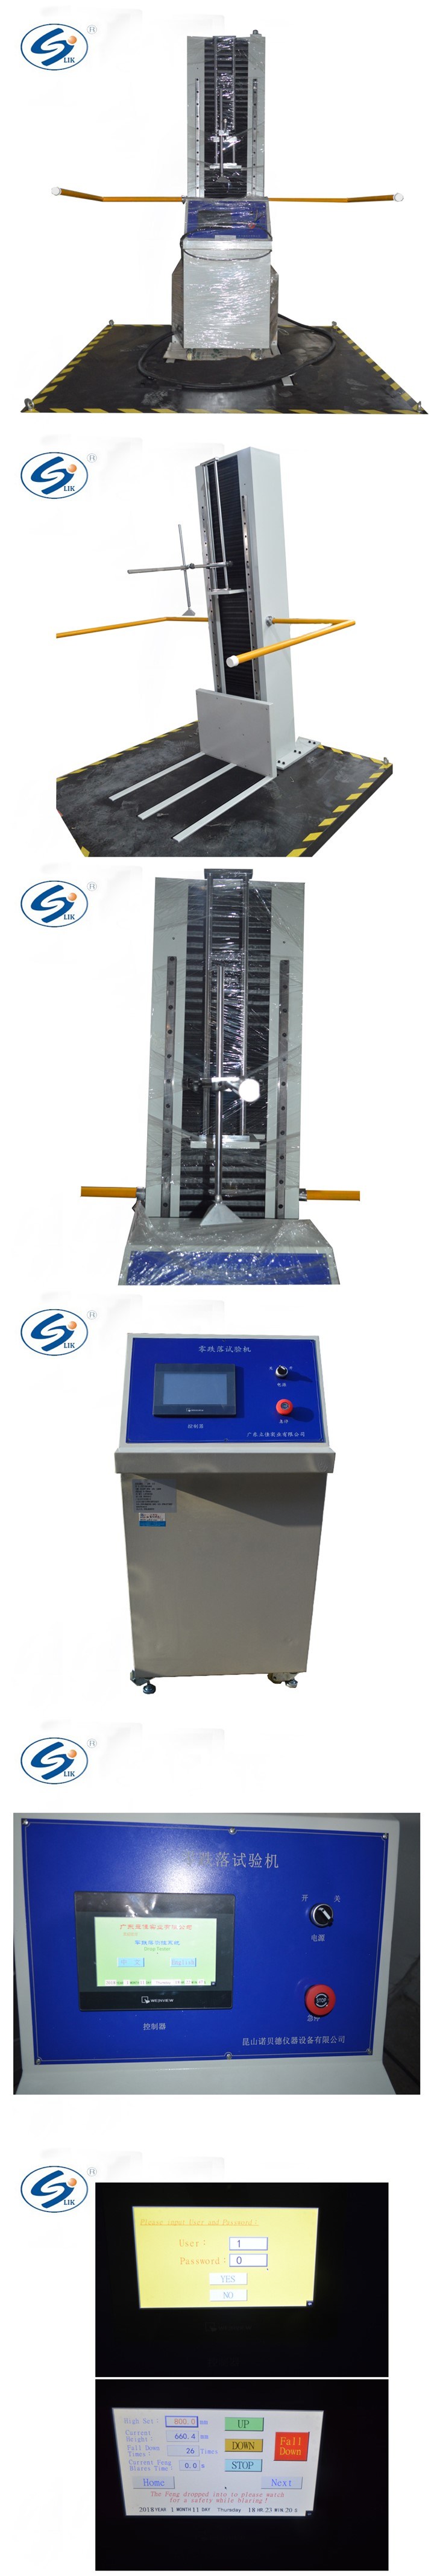 ISO Battery Double Wing Free Zero Drop Test Machine From Drop Testing